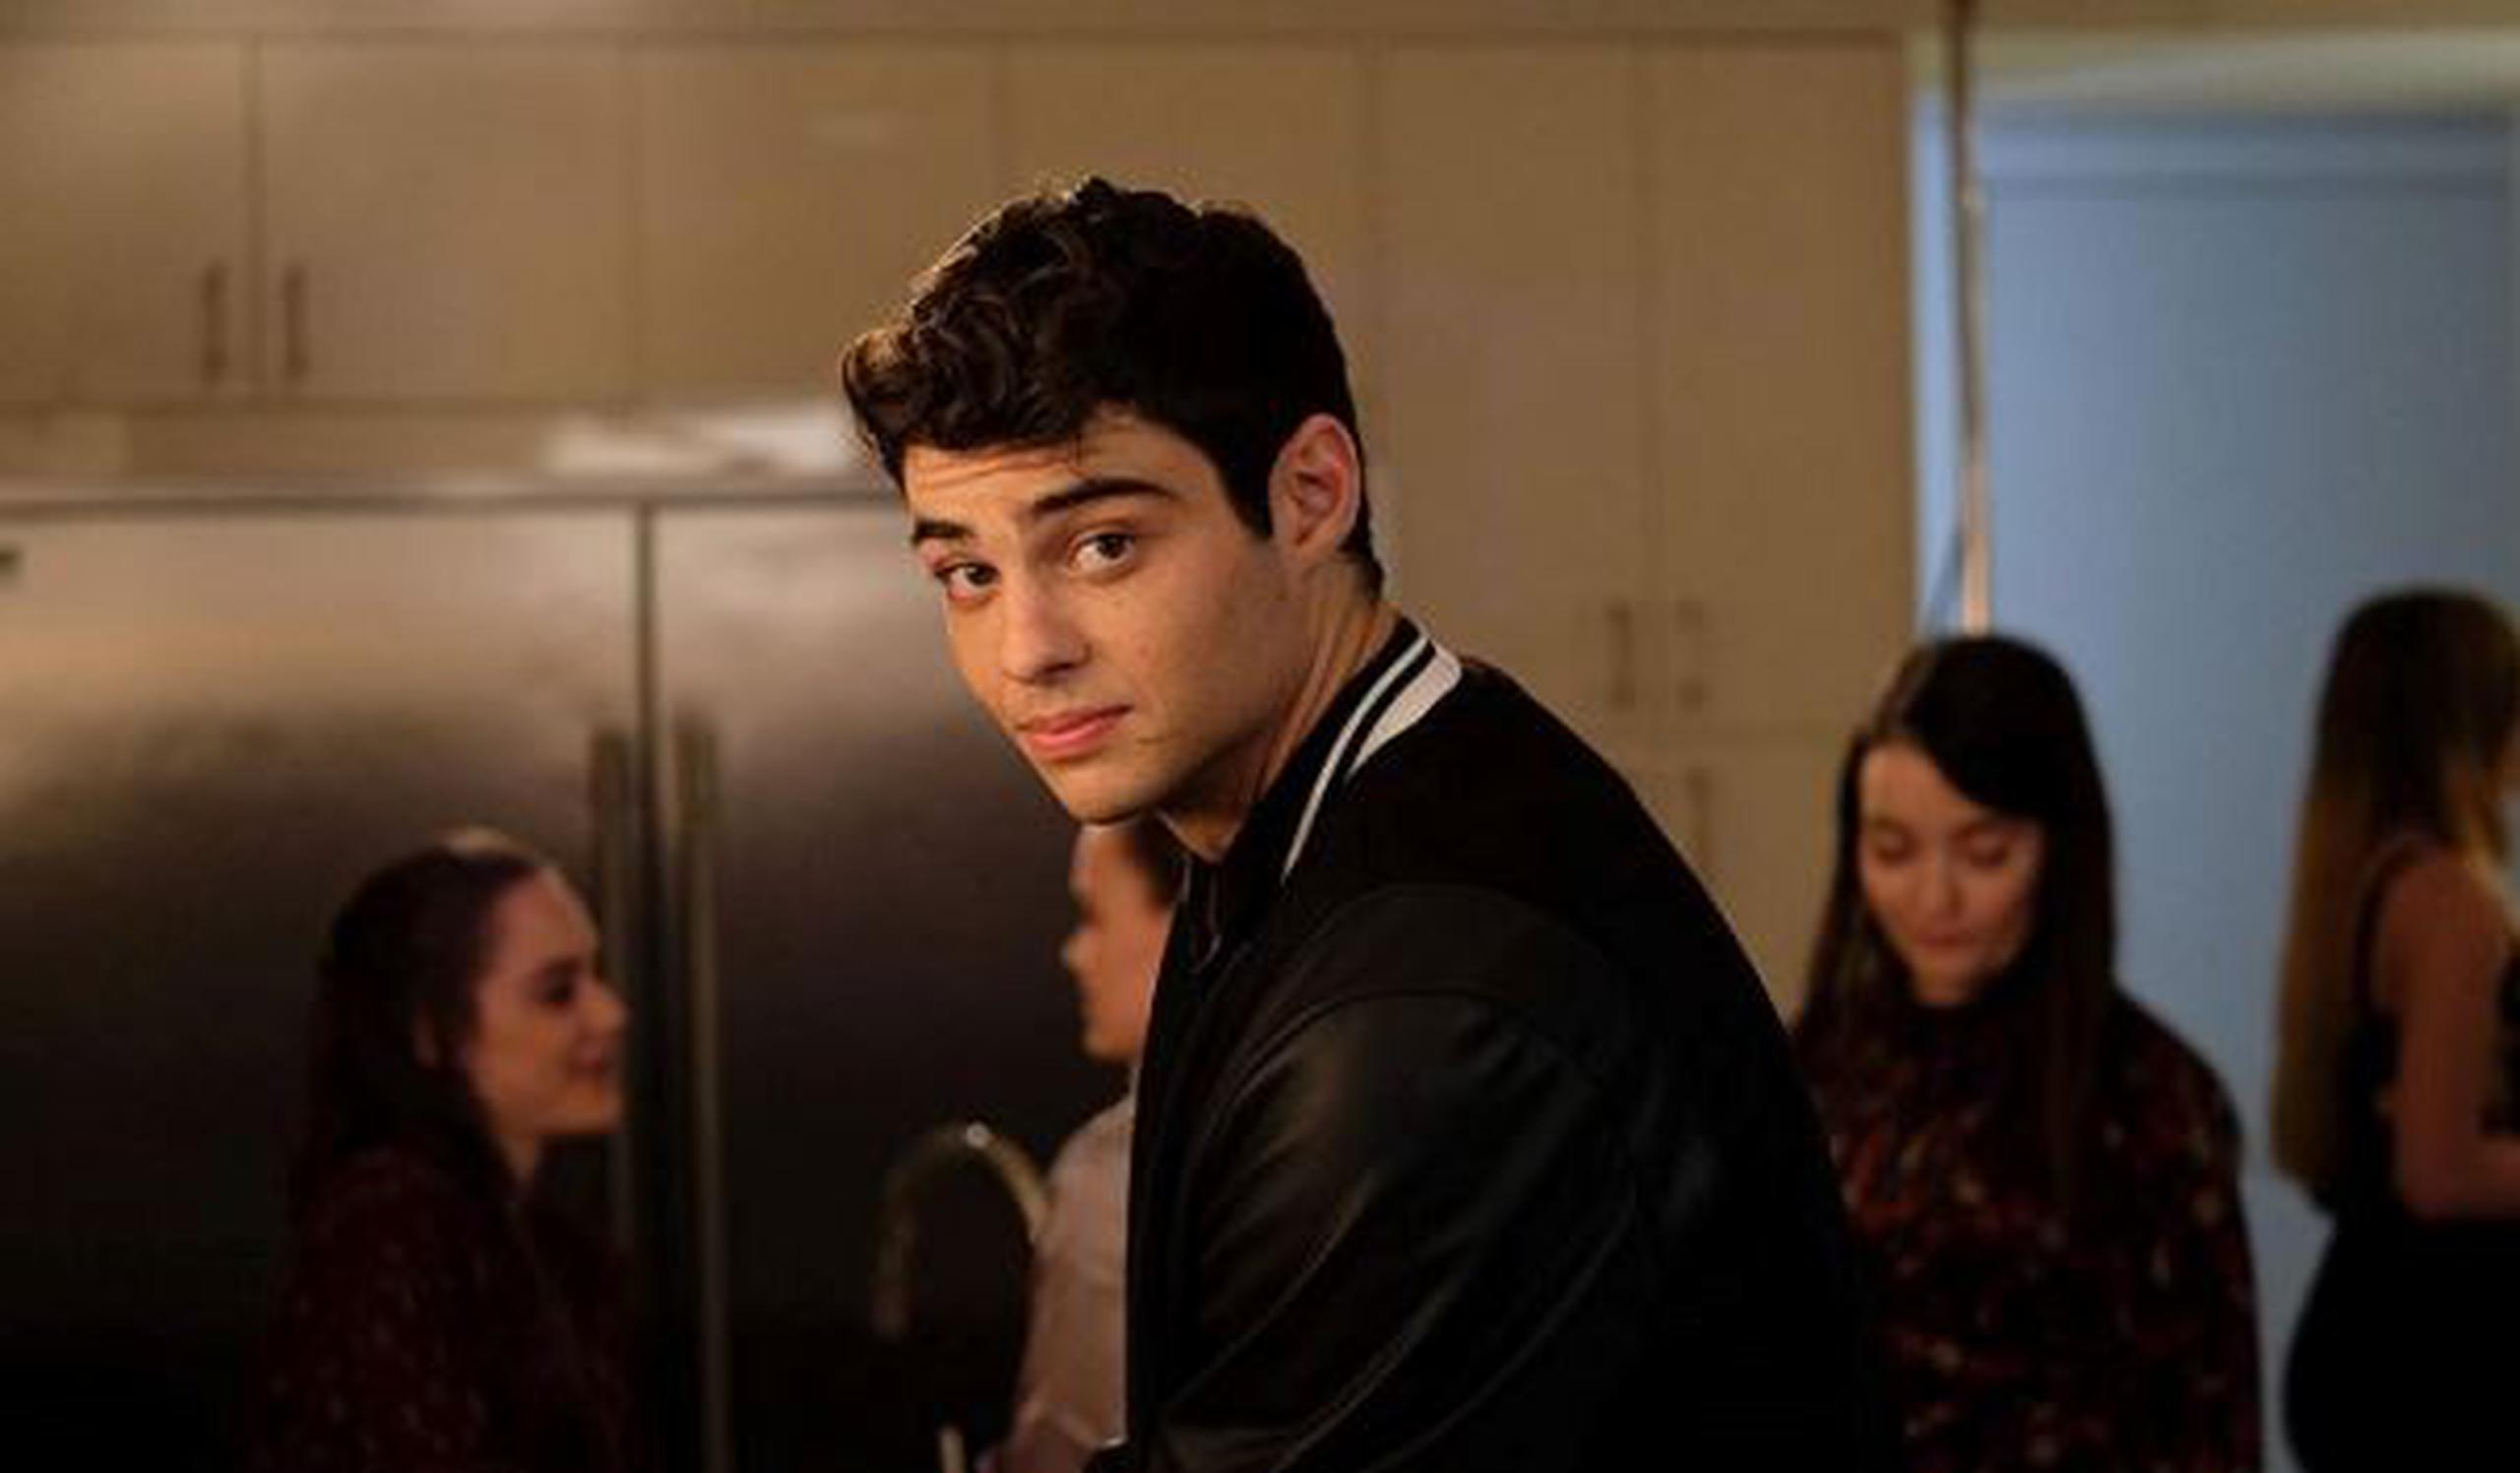 Noah Centineo también protagonizó "To All the Boys I've Loved Before" y "Sierra Burguess is a loser". (Captura)